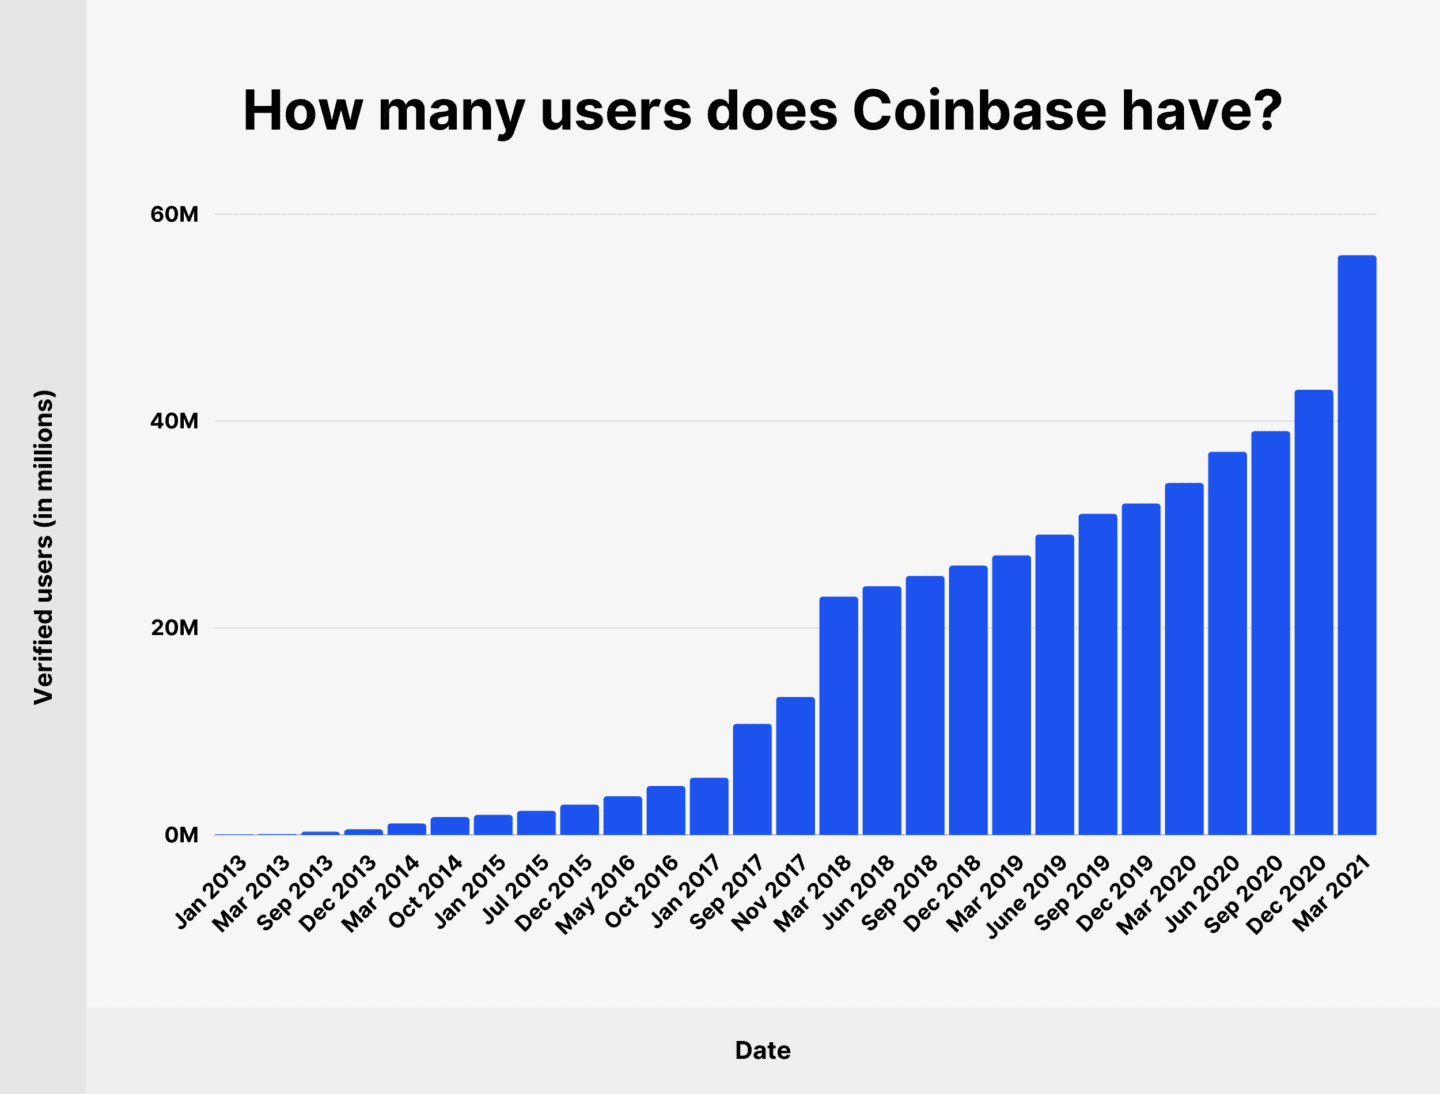 coinbase has 73 million total users